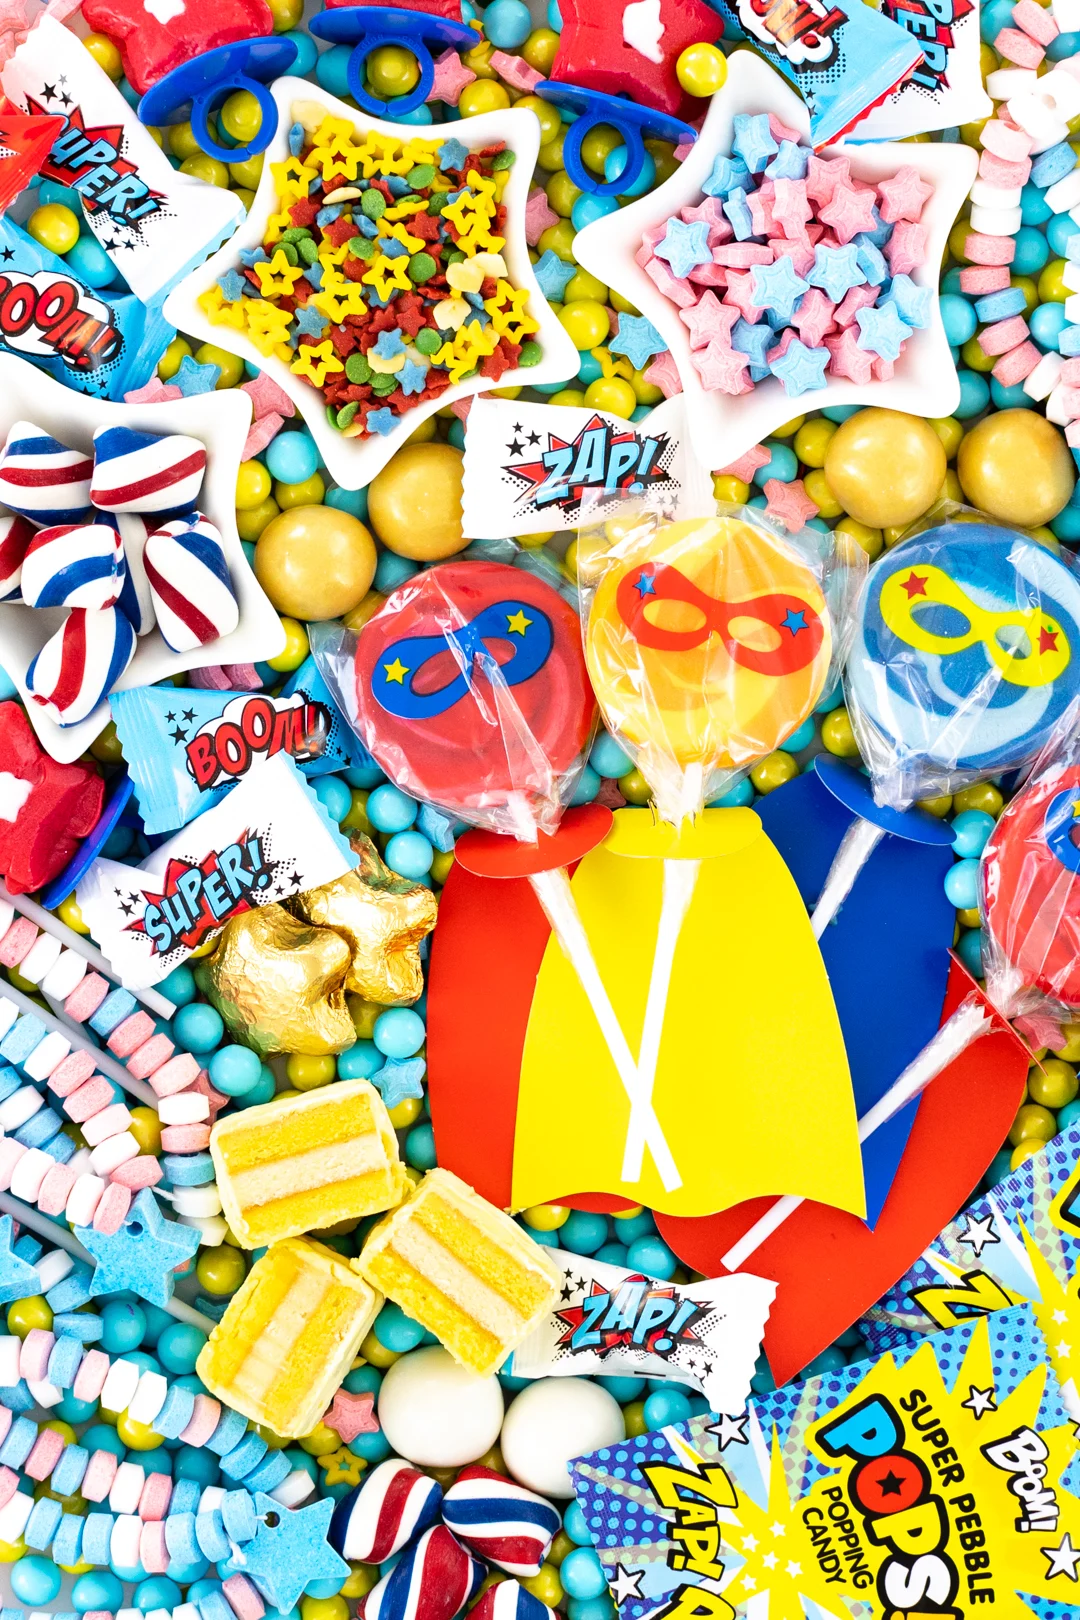 superhero candies, lollipops, cakes, candy sticks and buttermints